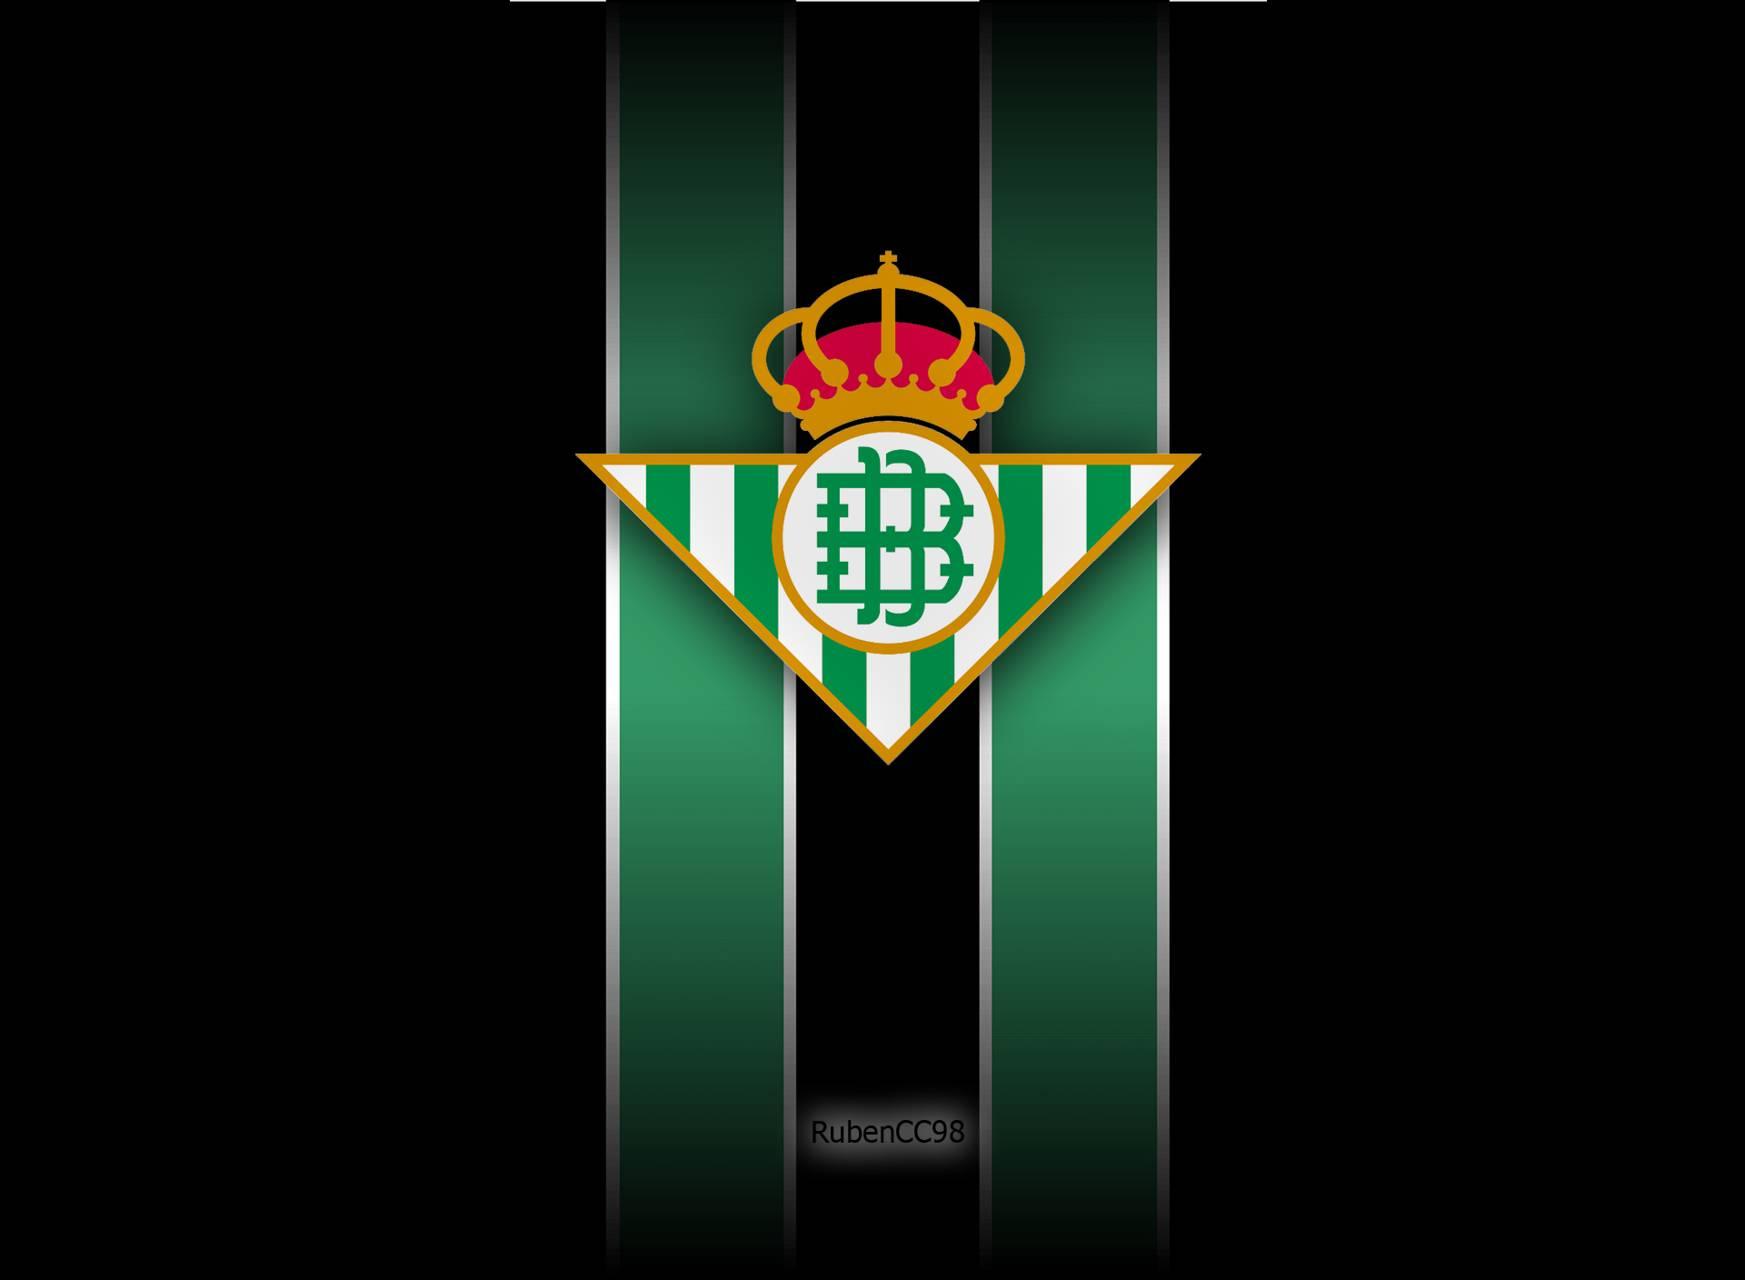 Real Betis Balompie Wallpapers by Rubencc98